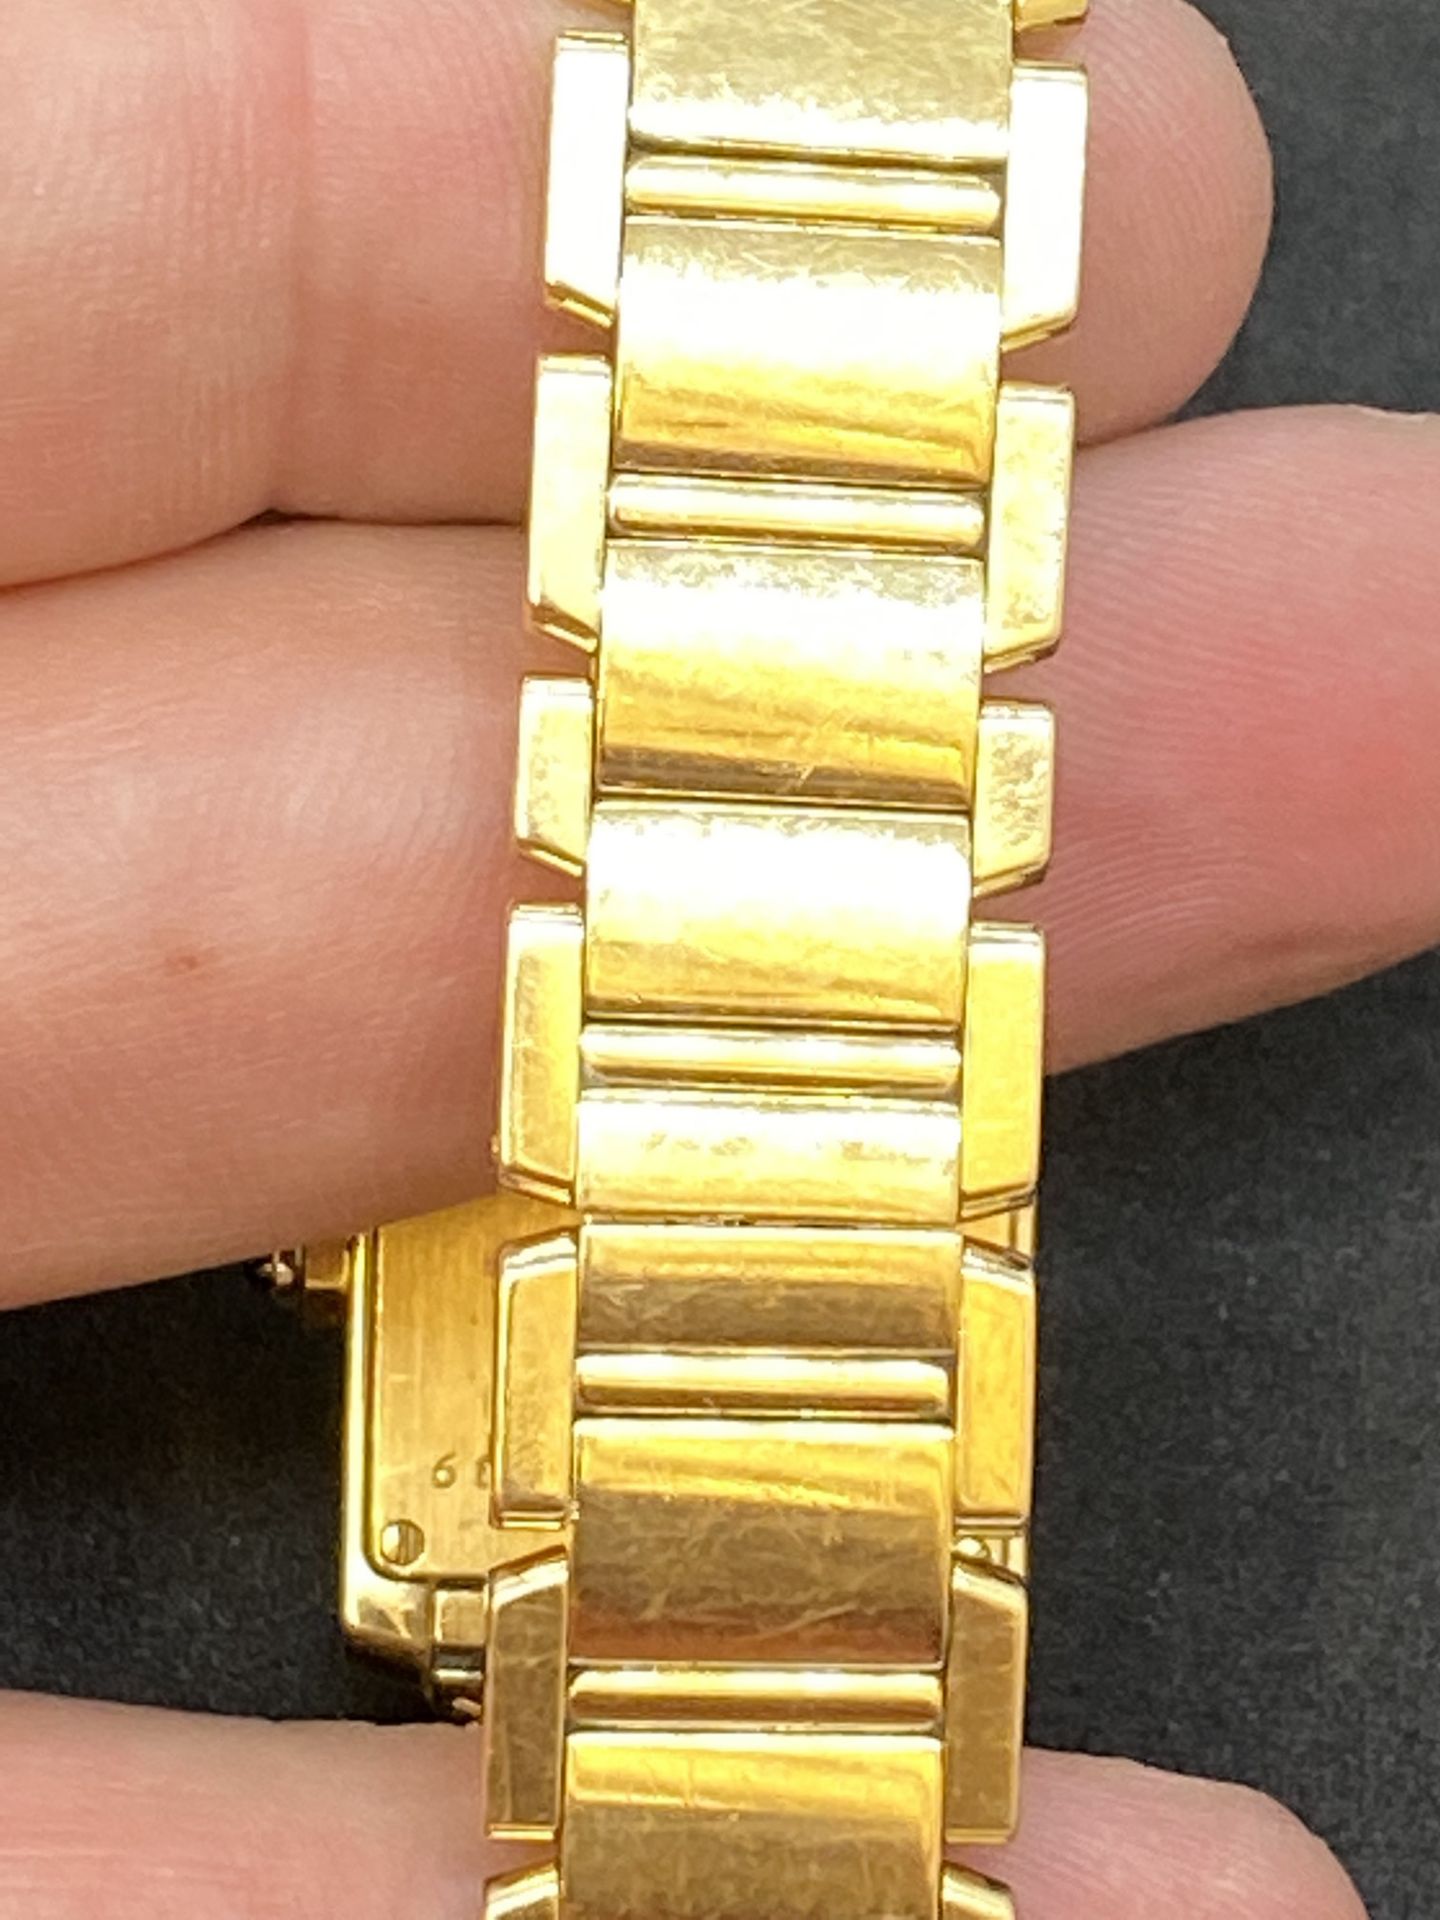 18ct GOLD CARTIER TANK FRANCAISE LADIES WATCH 2385 - Image 9 of 9